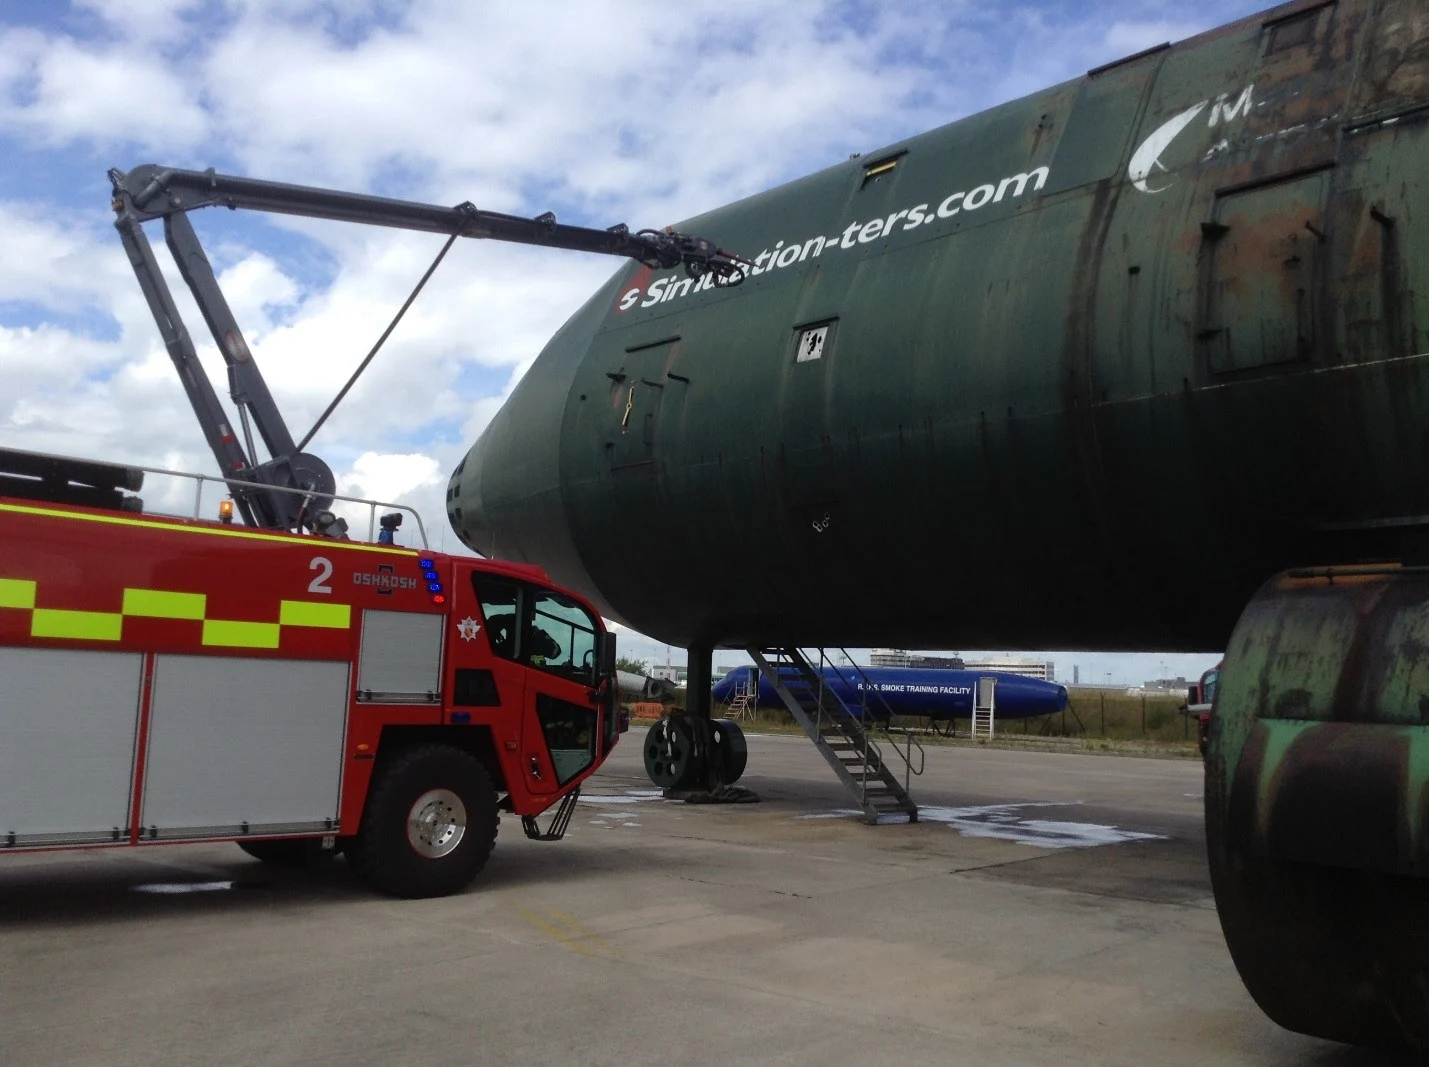 ARFF Truck with a Snozzle piercing a large airplane.